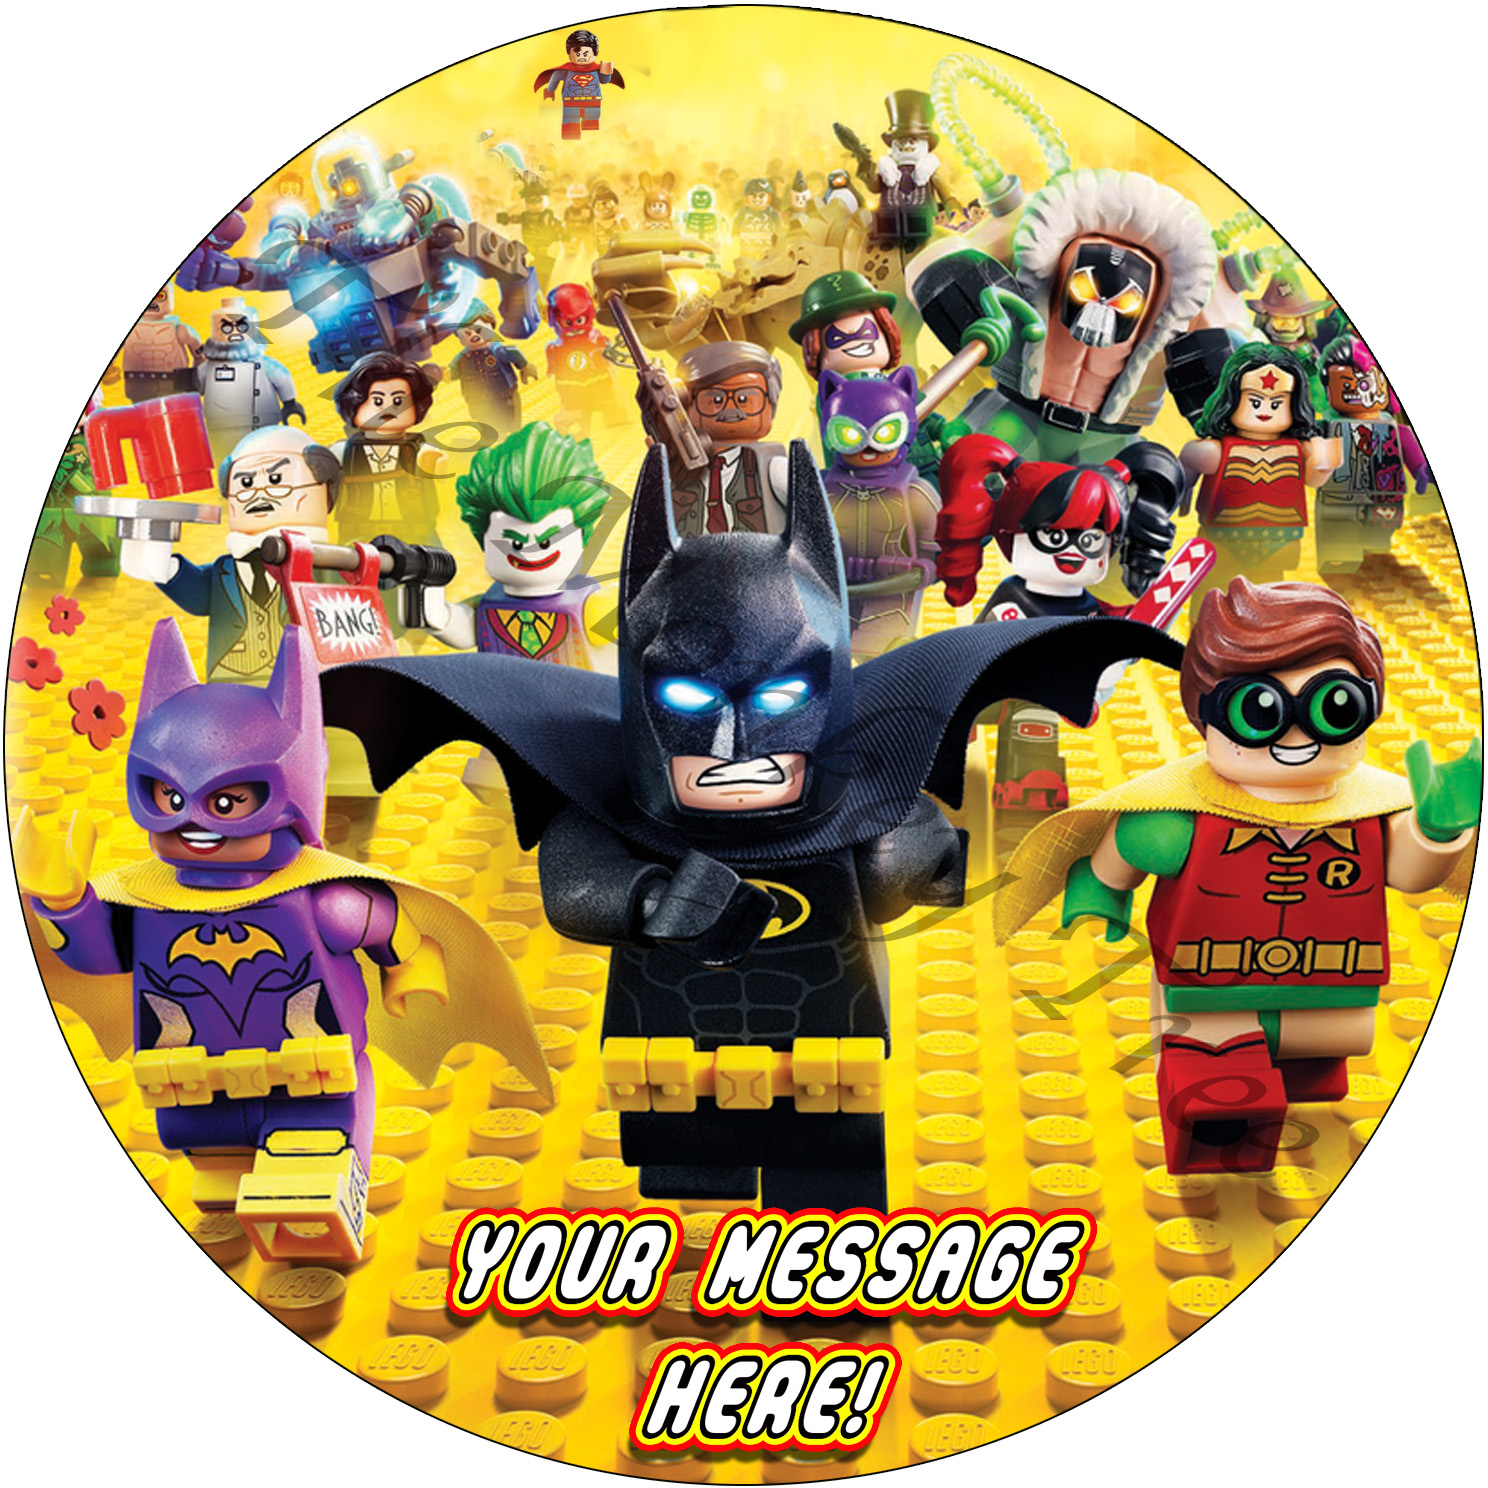 Personalized edible cake topper FREE SHIPPING in Canada LEGO BATMAN MOVIE 